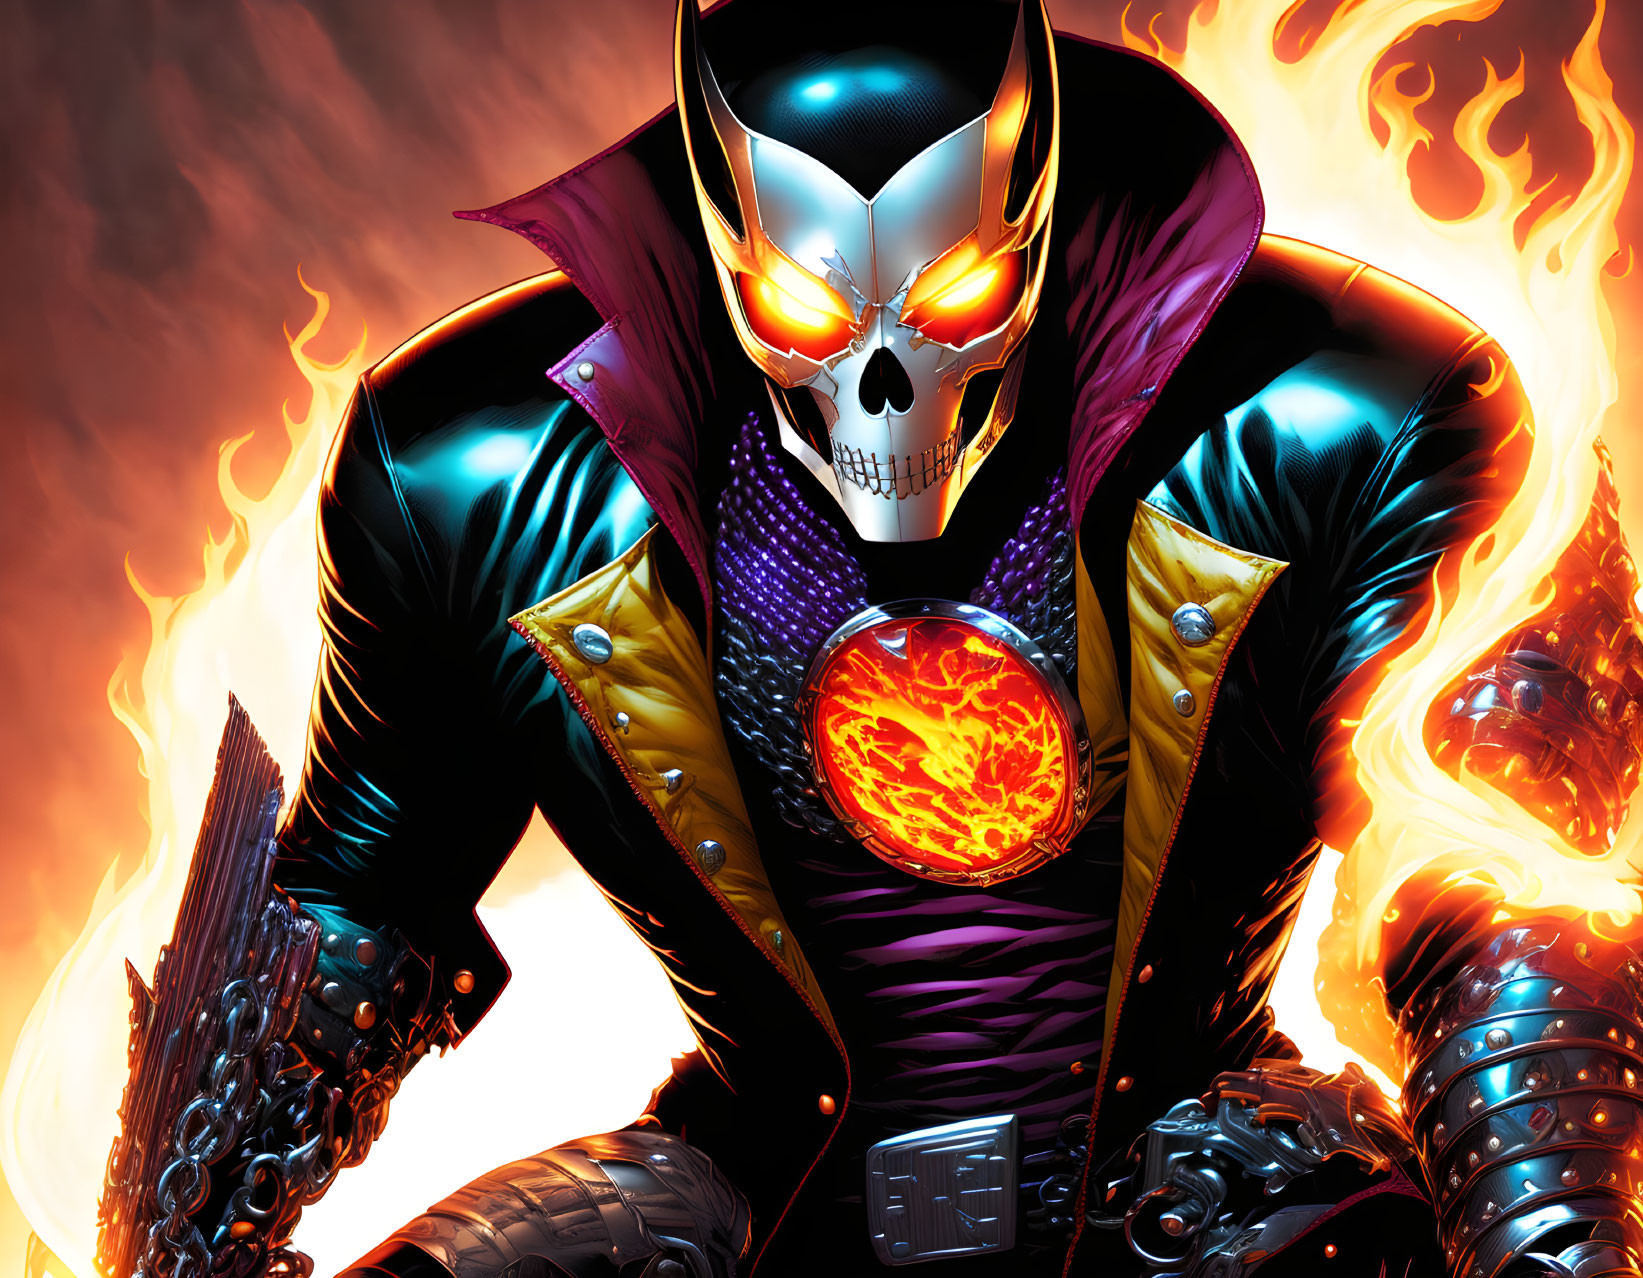 Skull-headed figure in leather jacket with flames on chest against inferno backdrop